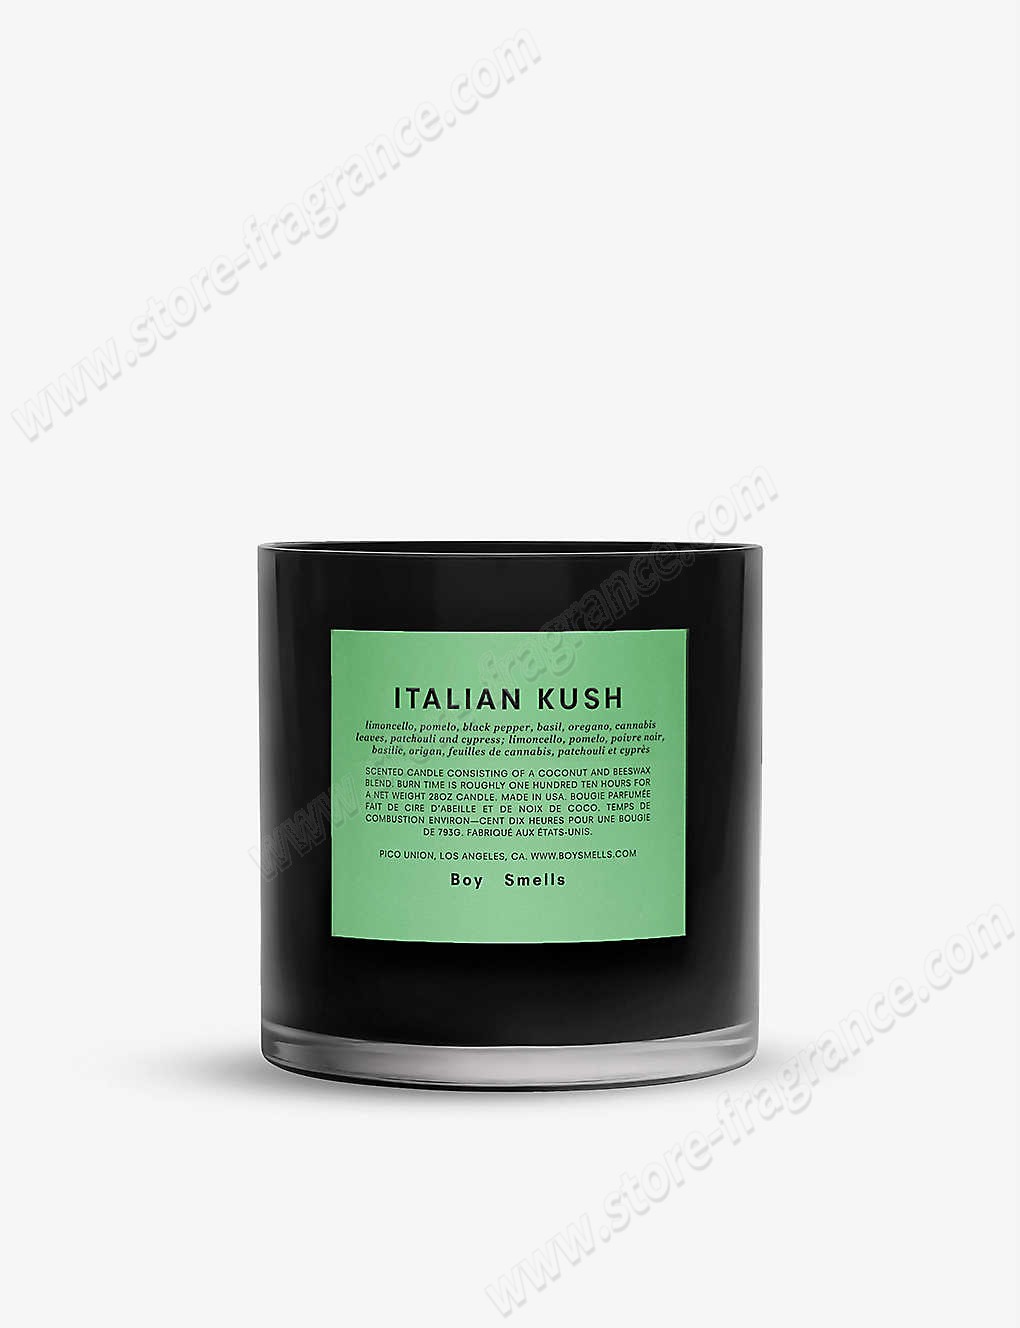 BOY SMELLS/Italian Kush scented candle 793g ✿ Discount Store - -0